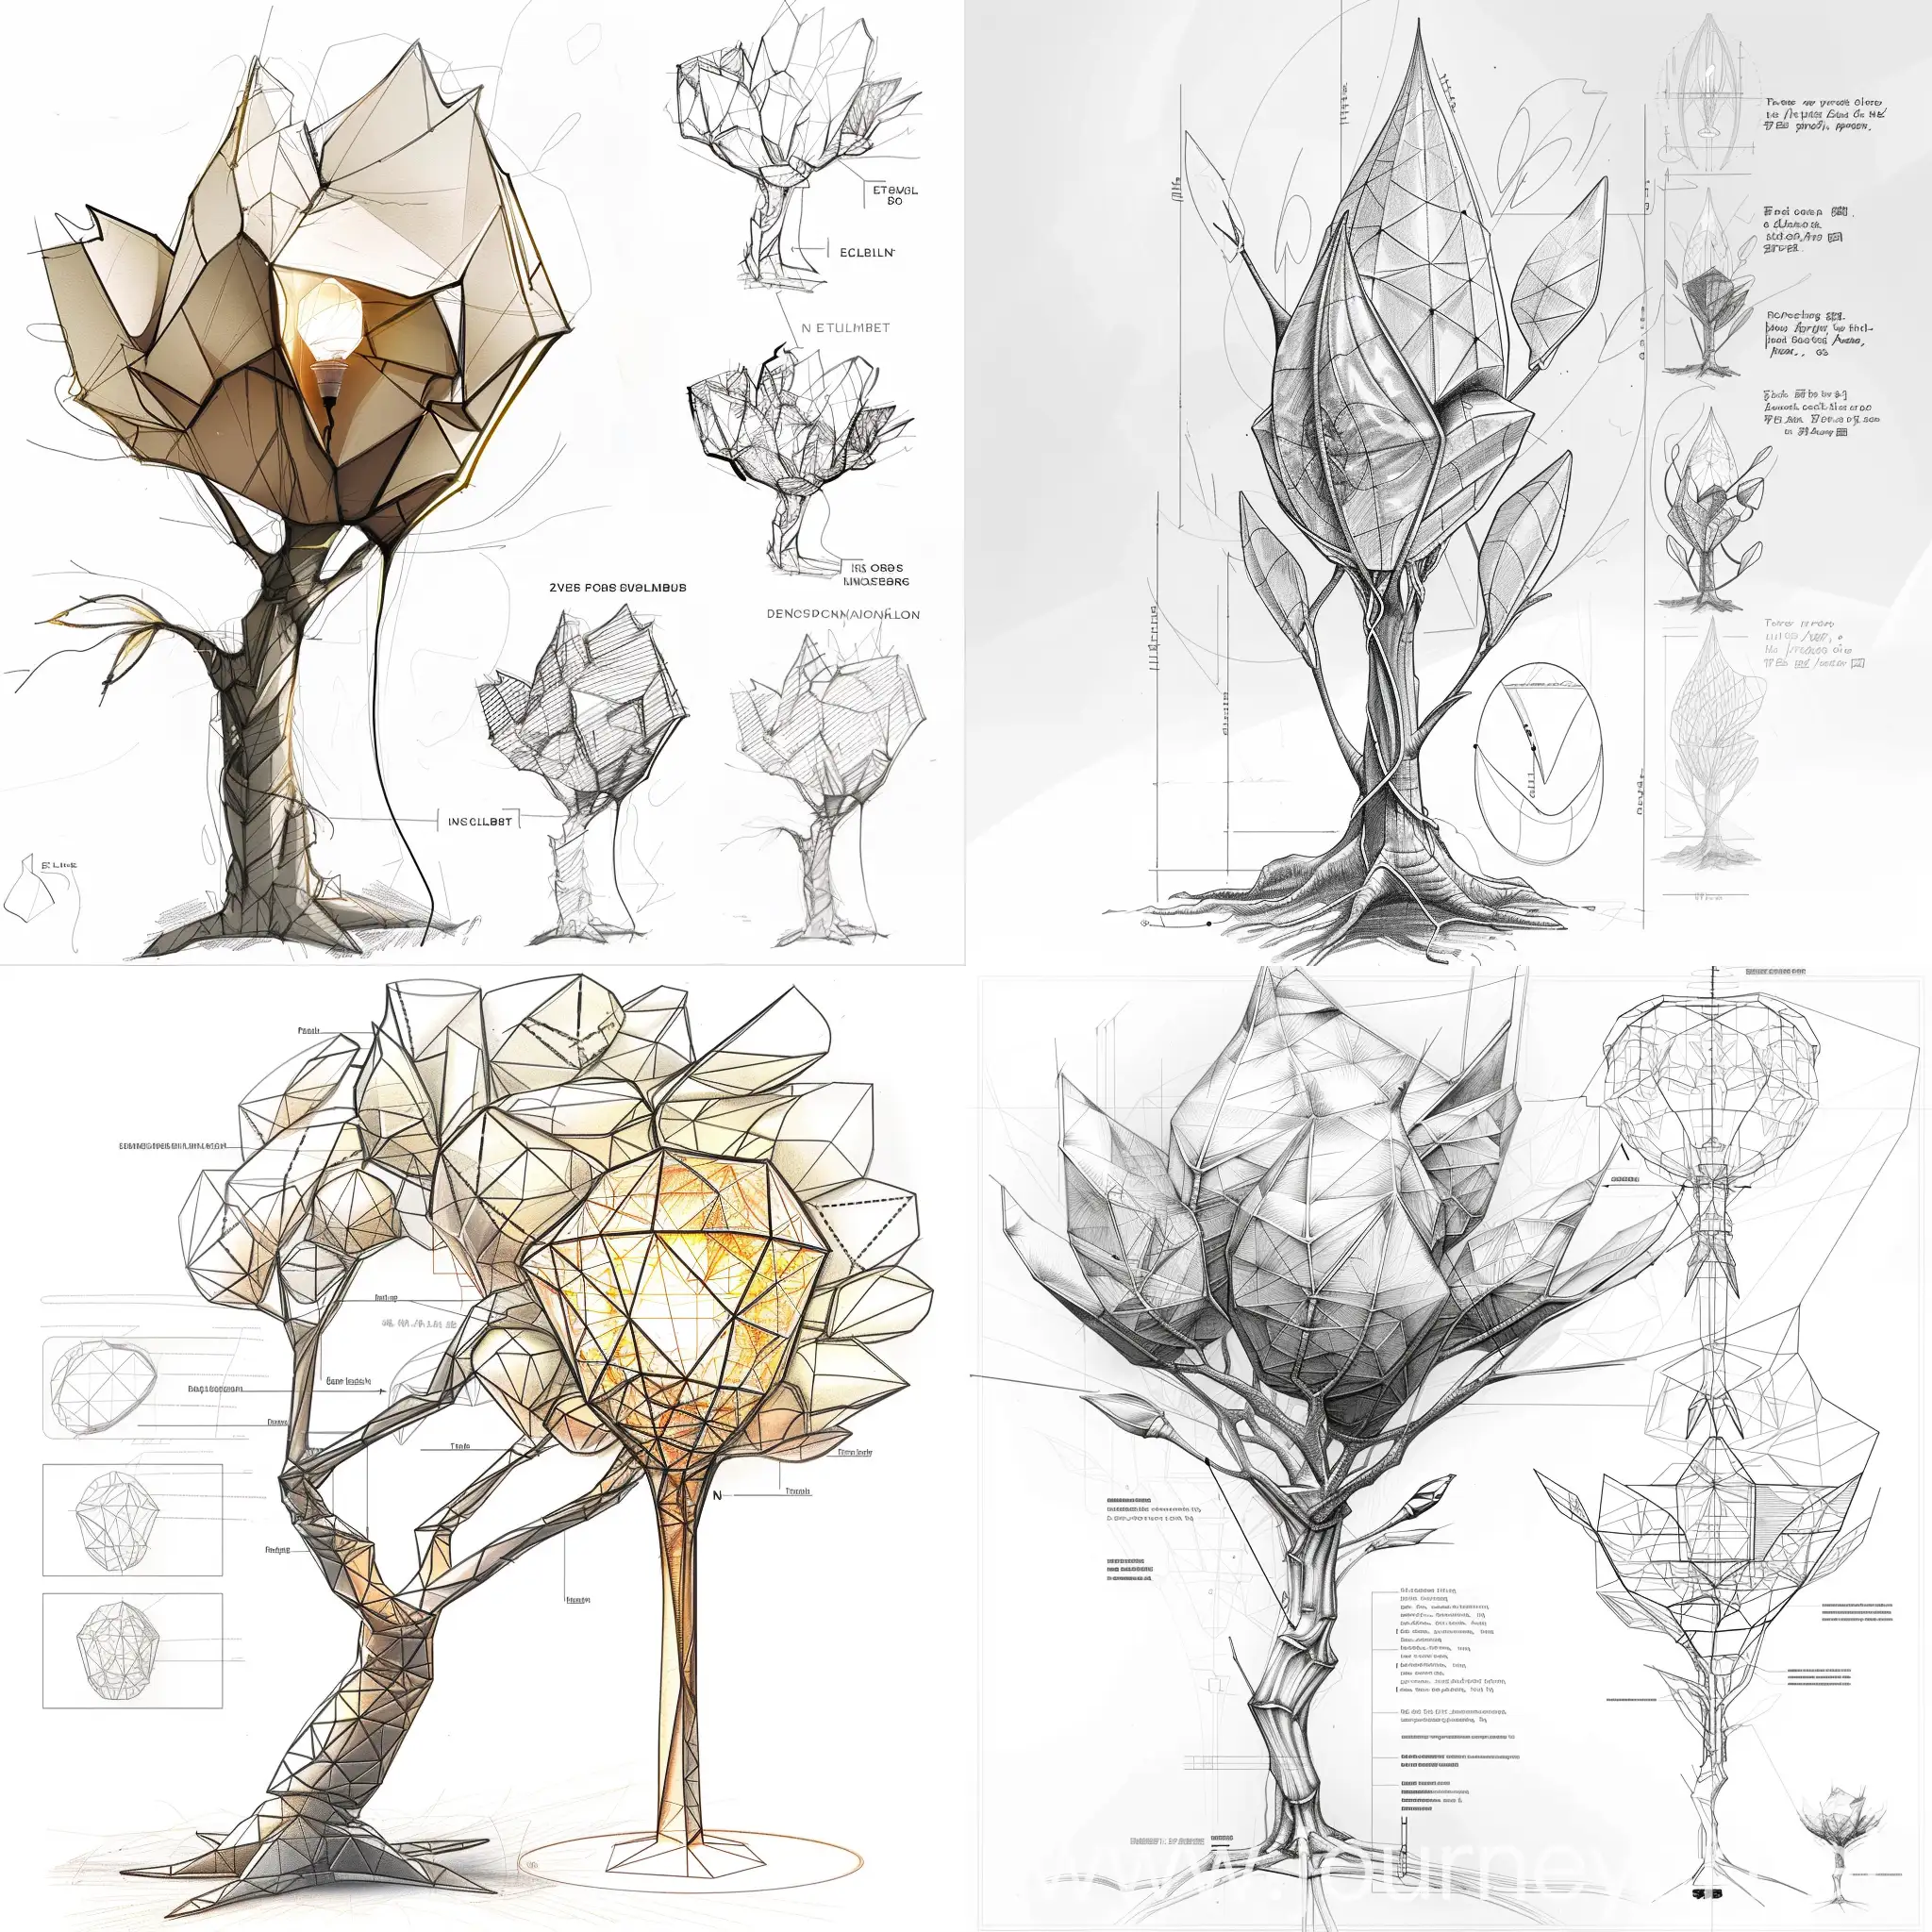 HandDrawn-Product-Design-TreeElement-Lamps-Sketch-Collection